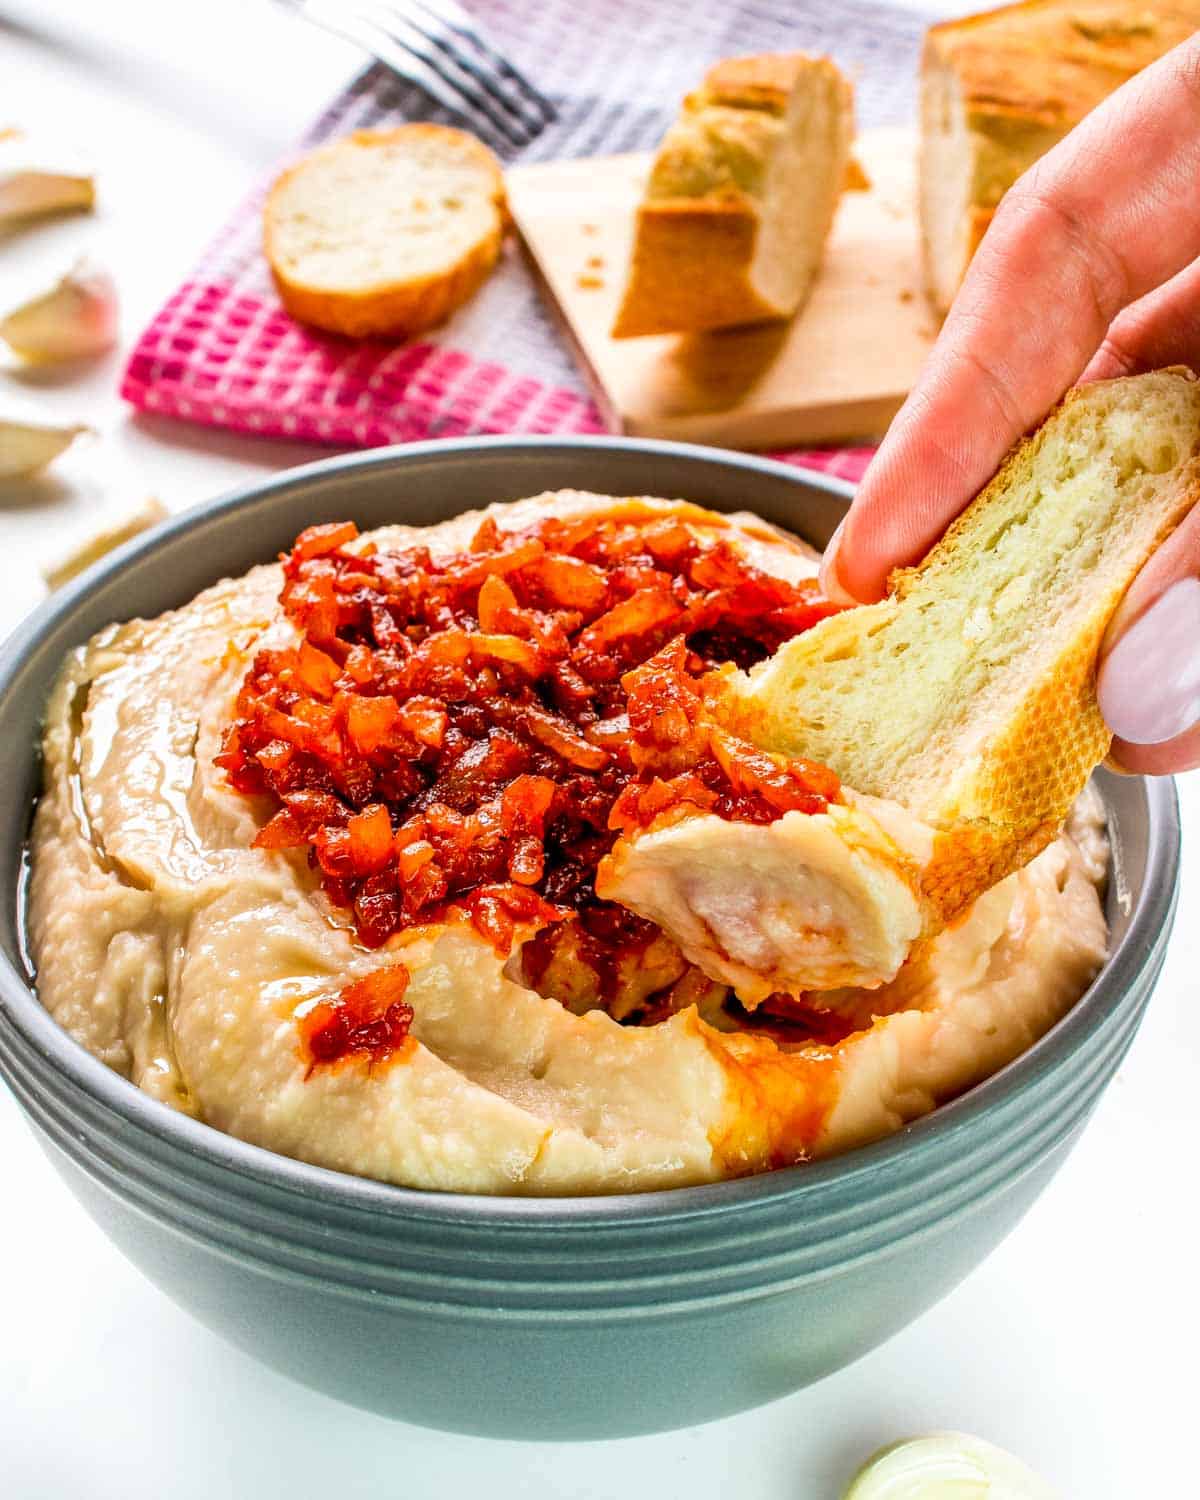 a hand dipping a piece of bread into a bowl with white bean dip.